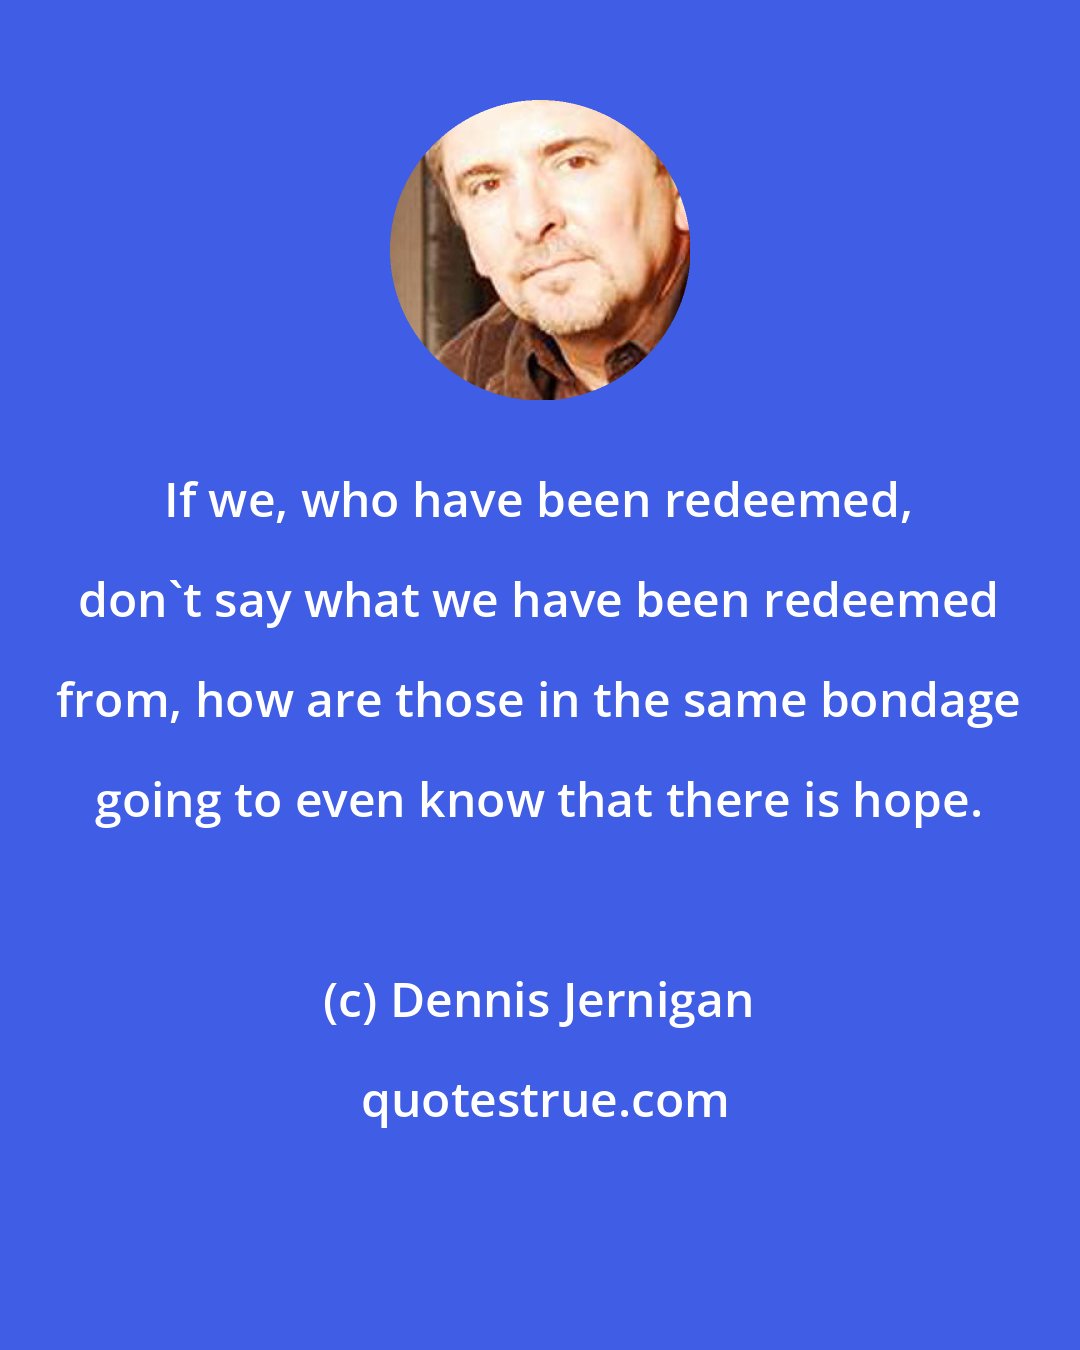 Dennis Jernigan: If we, who have been redeemed, don't say what we have been redeemed from, how are those in the same bondage going to even know that there is hope.